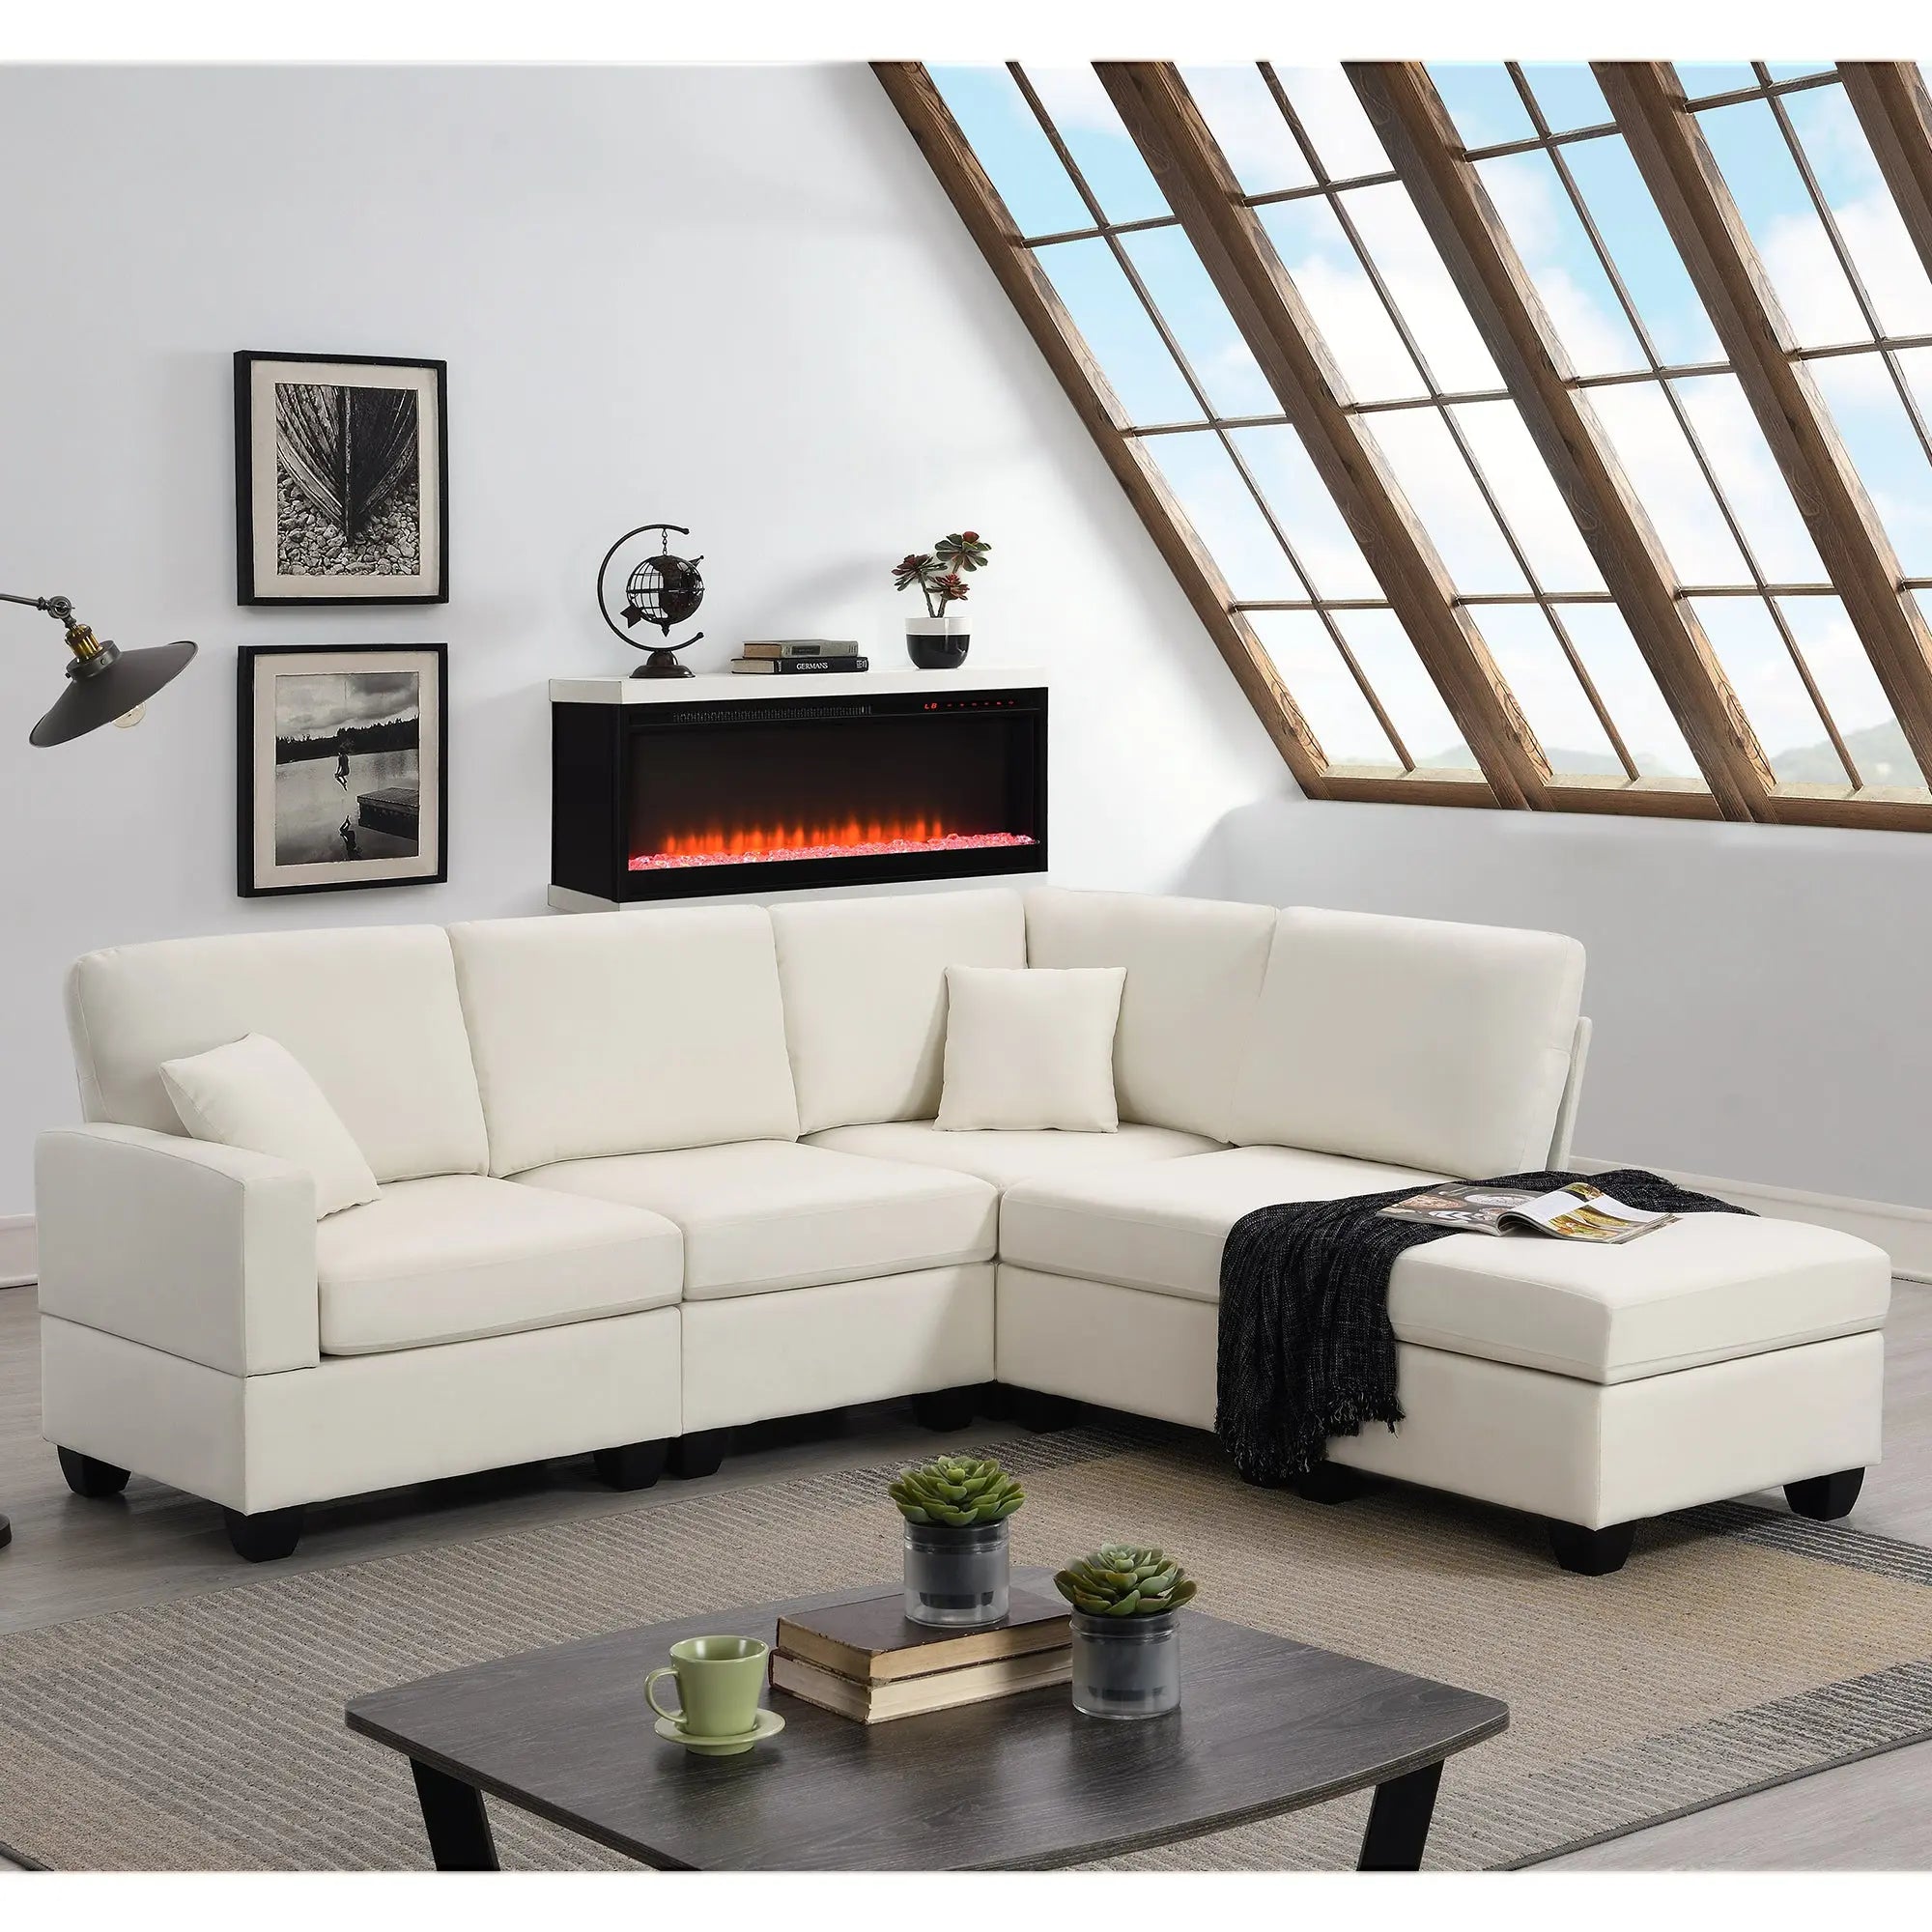 Bellemave 90" Modern L-Shape Sectional Sofa,5-Seat Modular Couch Set with Convertible Ottoman and 2 Pillows Bellemave